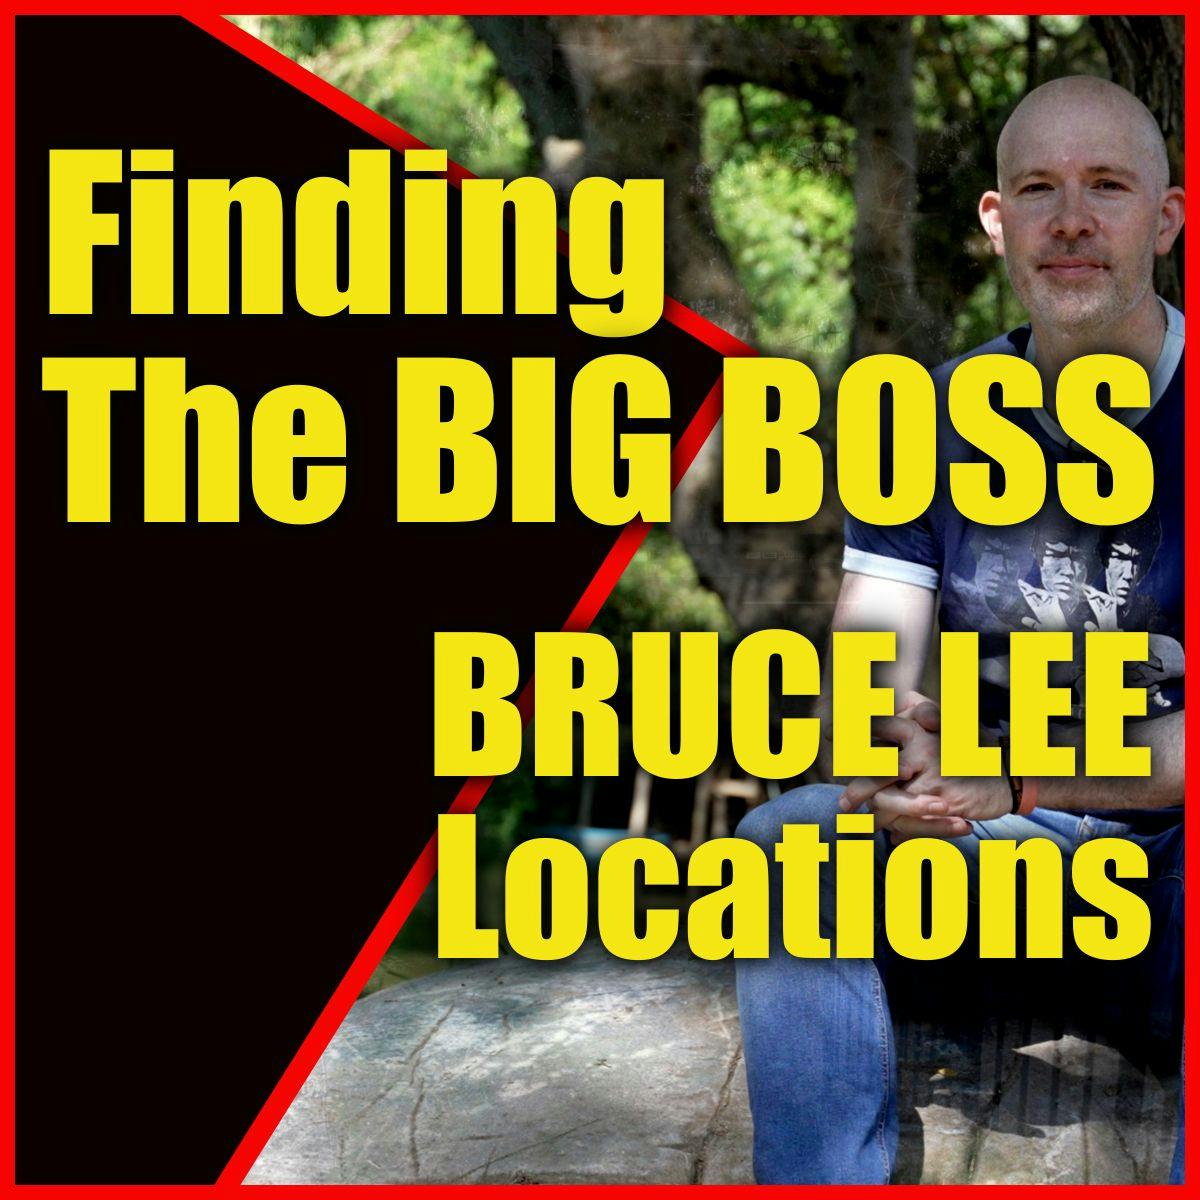 Finding The BIG BOSS  BRUCE LEE Locations